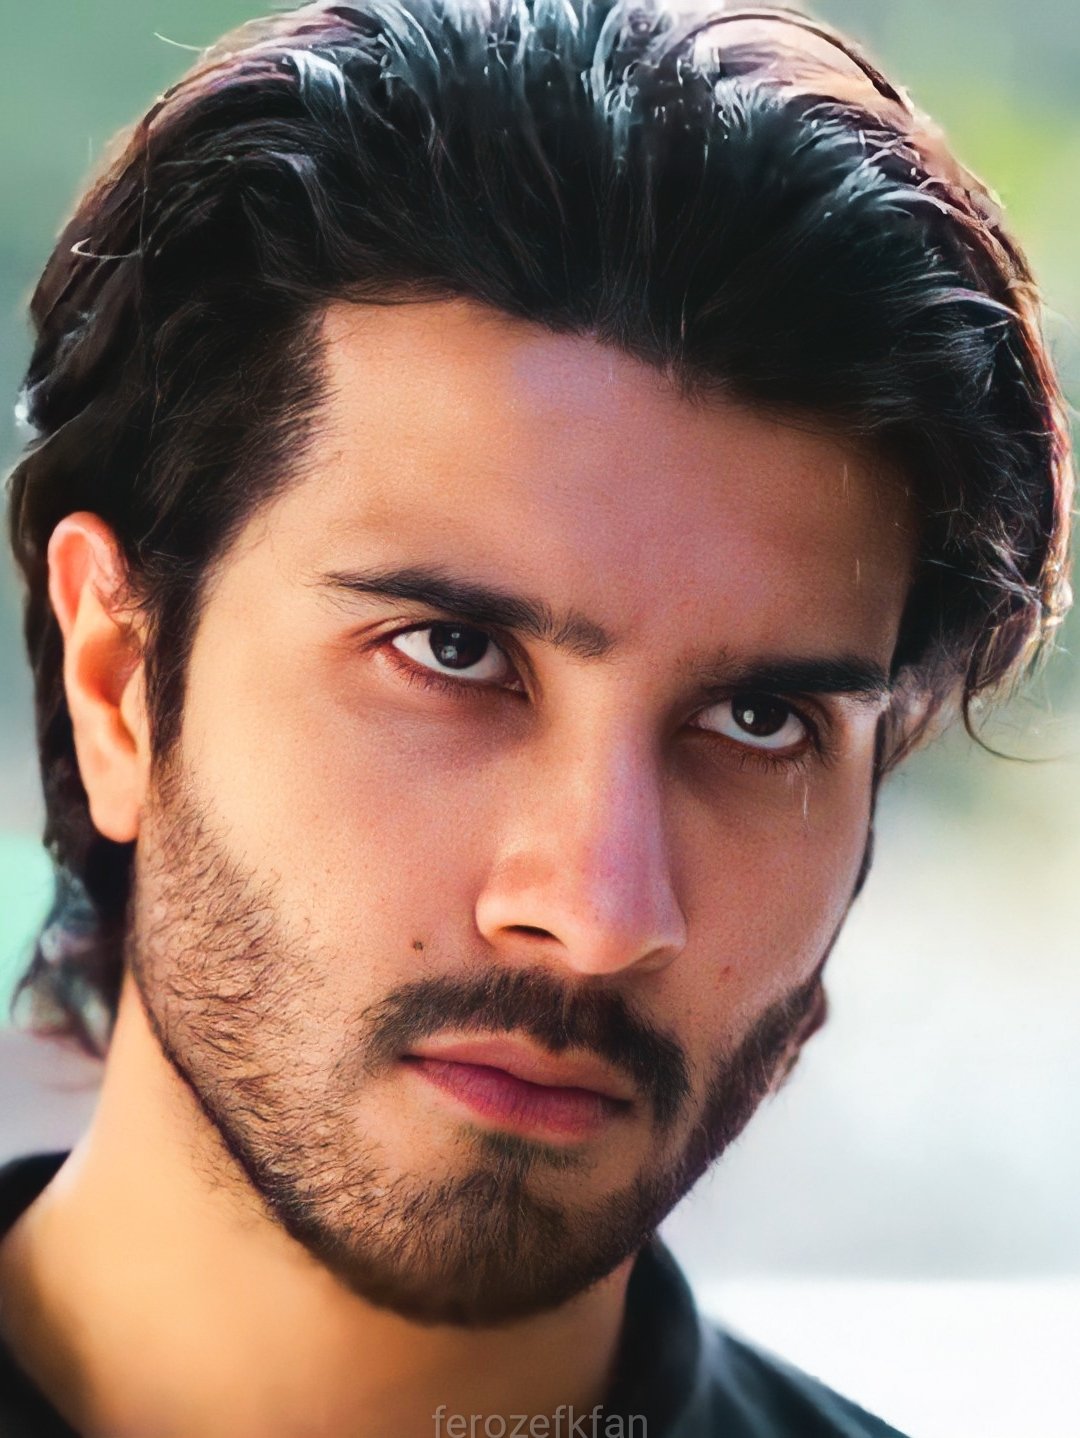 Feroze Khan opens up about cosmetic surgery gone wrong